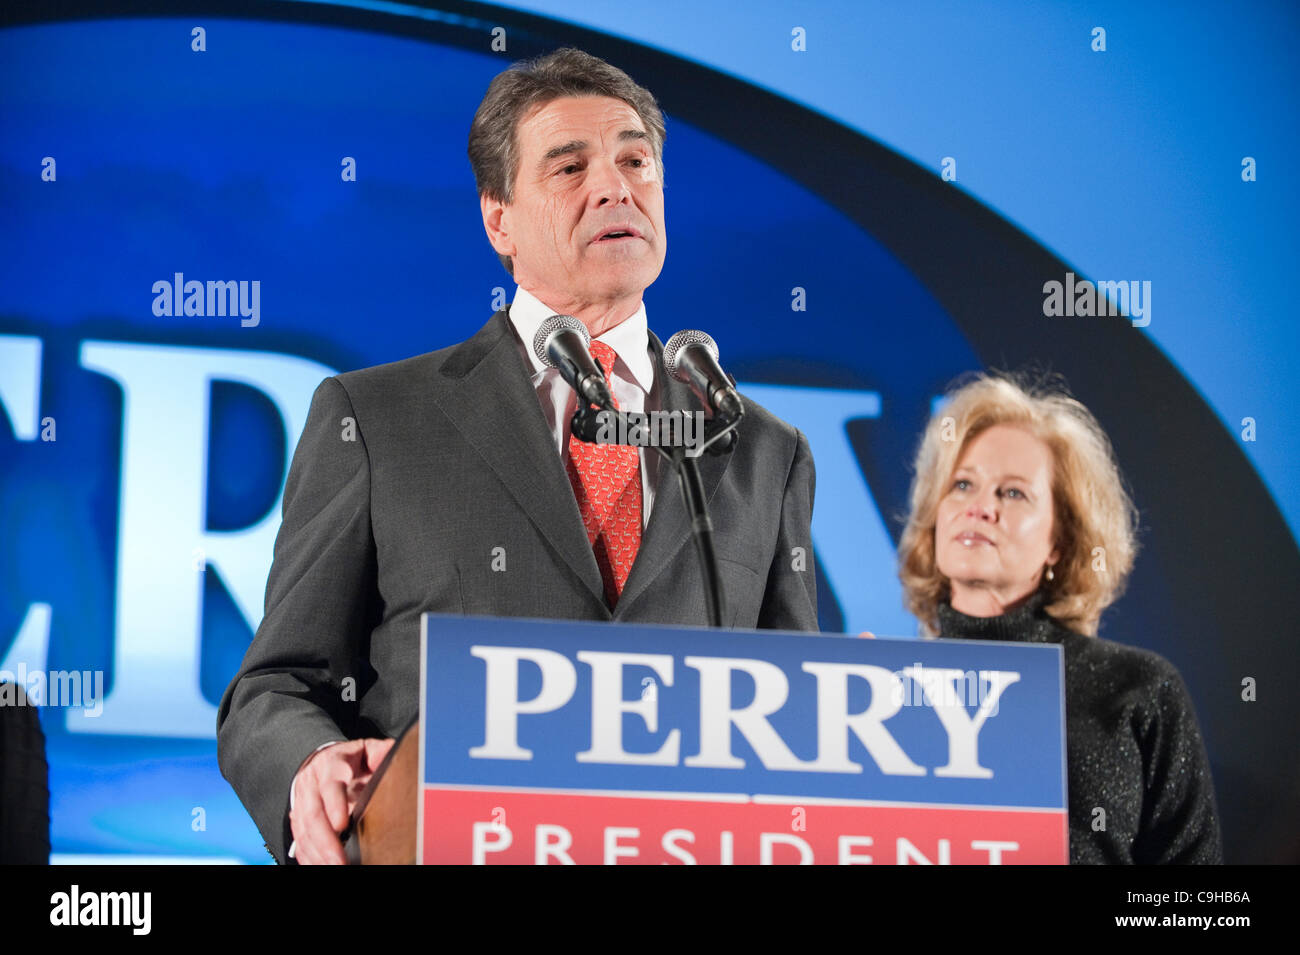 Republican candidate Rick Perry speaks to supporters after his fifth place finish in the Iowa caucuses January 3, 2012 Stock Photo